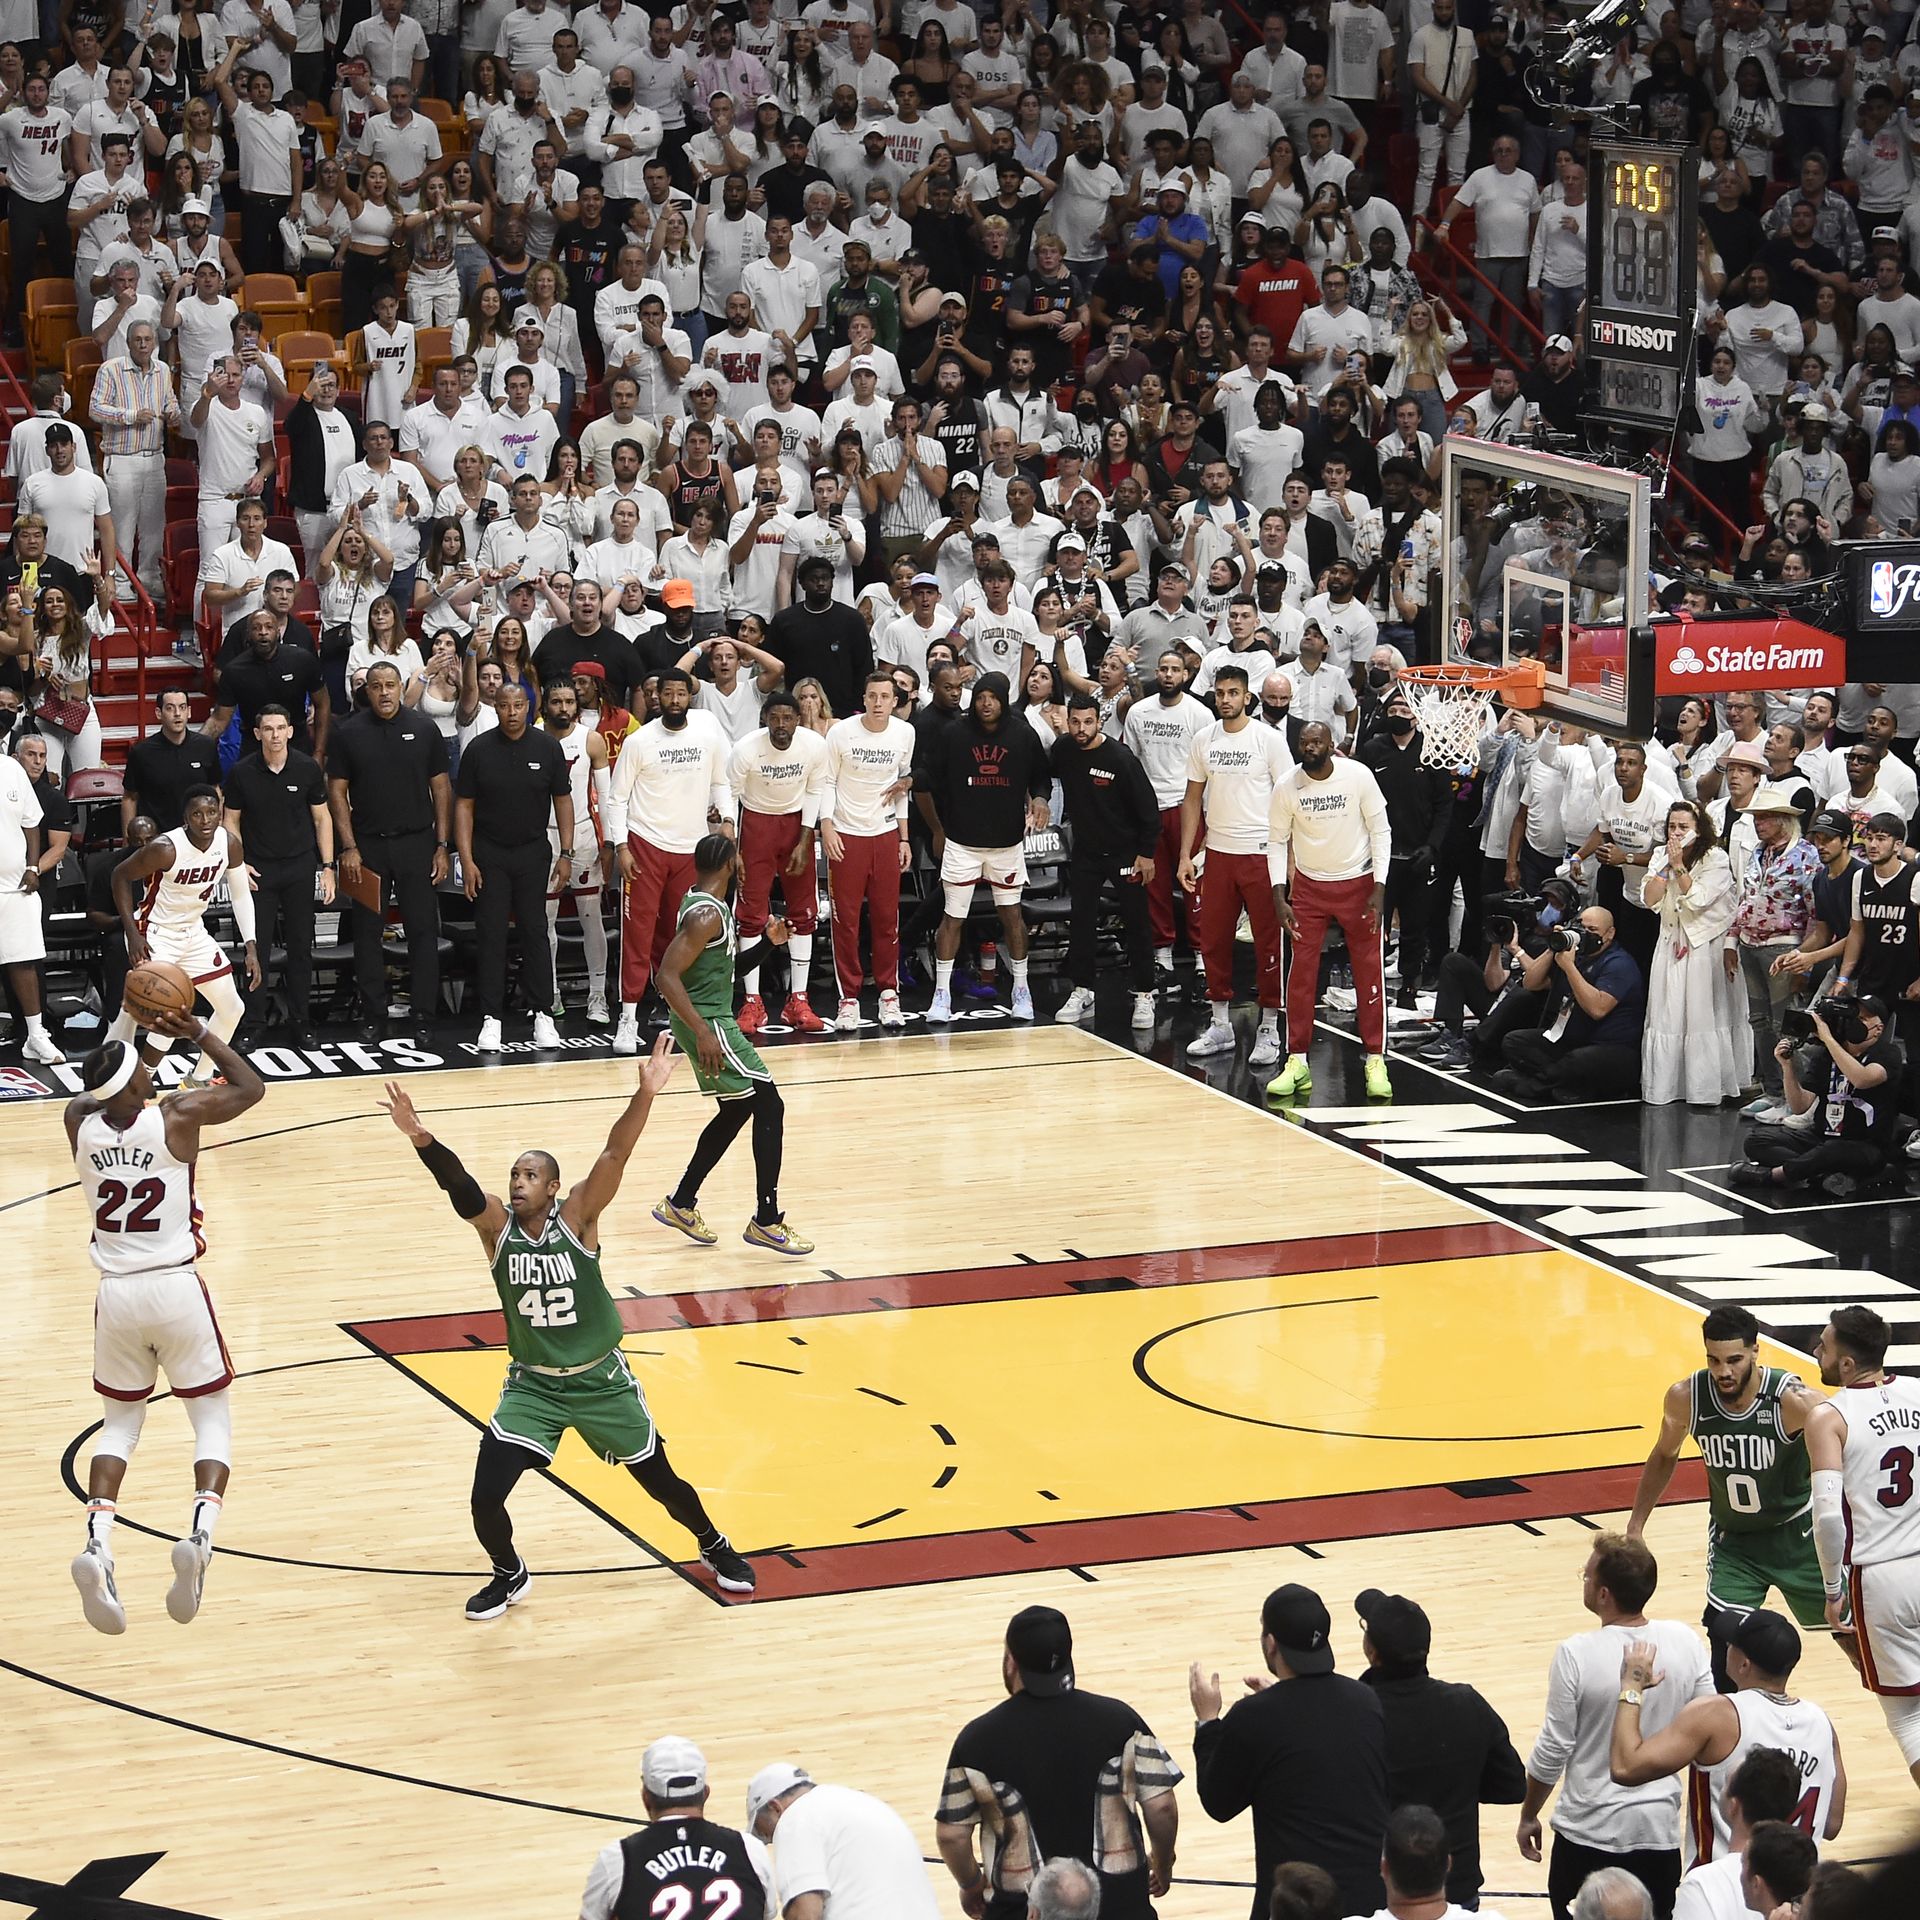 Miami defeats Boston and goes to the NBA Finals